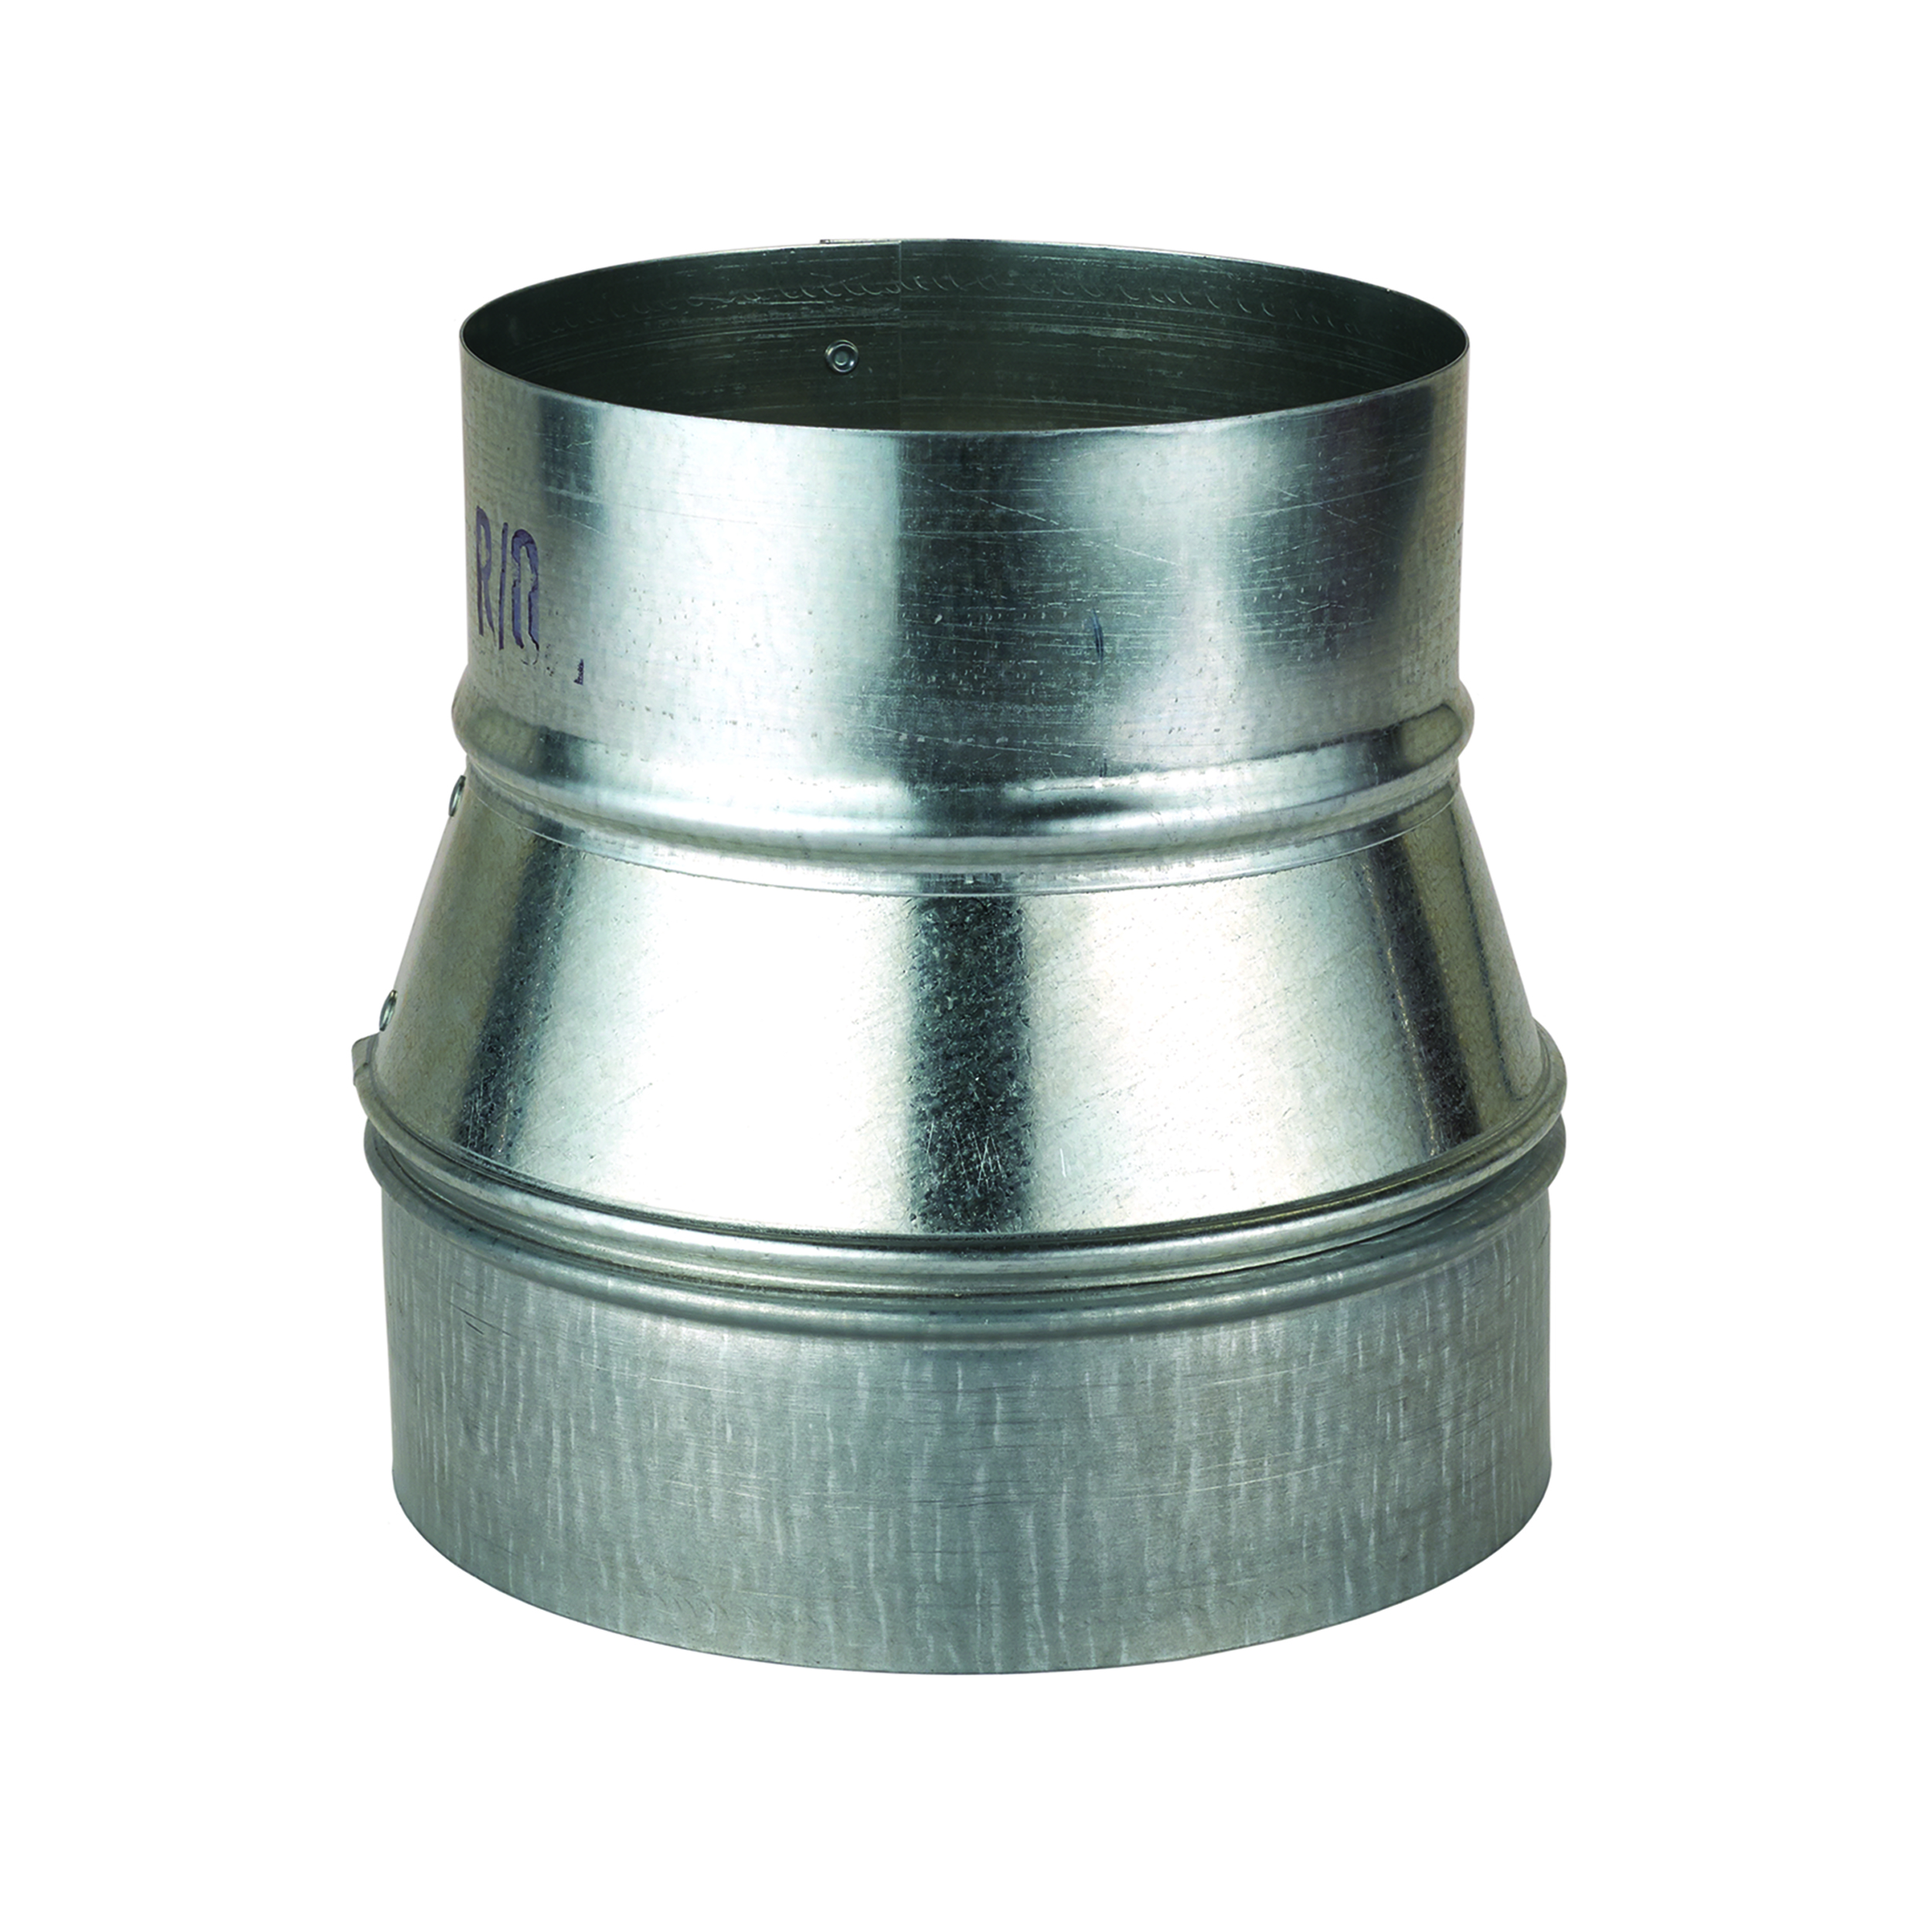 Metal 6" To 5" Reducer Dust Collection Fitting